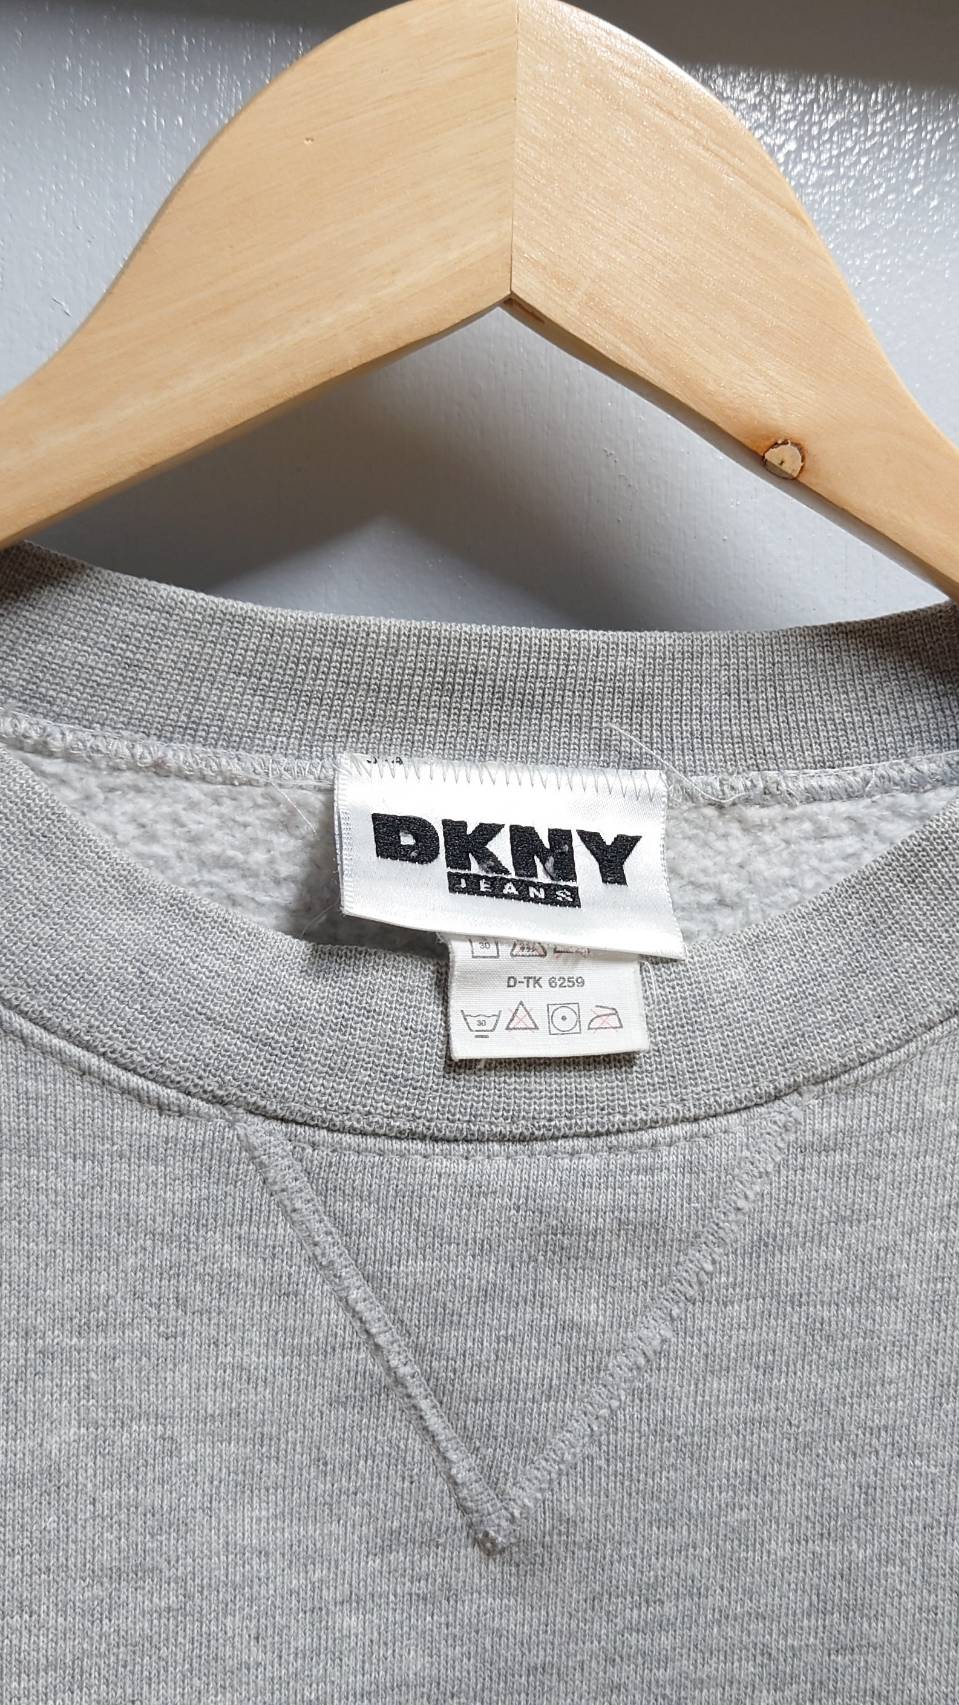 90's DKNY JEANS USA製 ロゴ プリント スウェット トレーナー